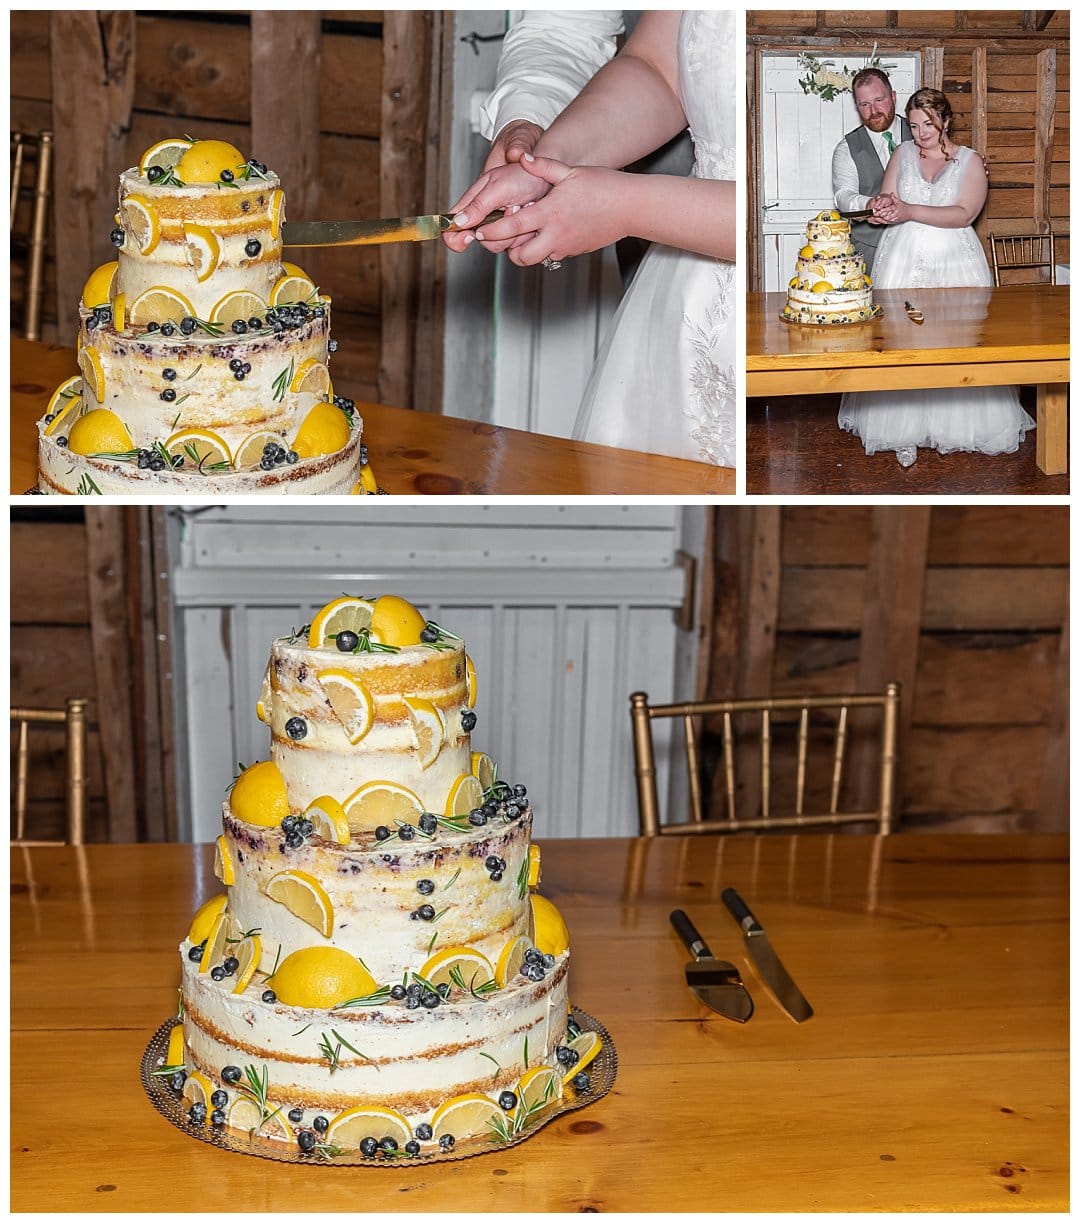 The bride and groom cut the wedding cake during their reception at Healy Farm in NS.